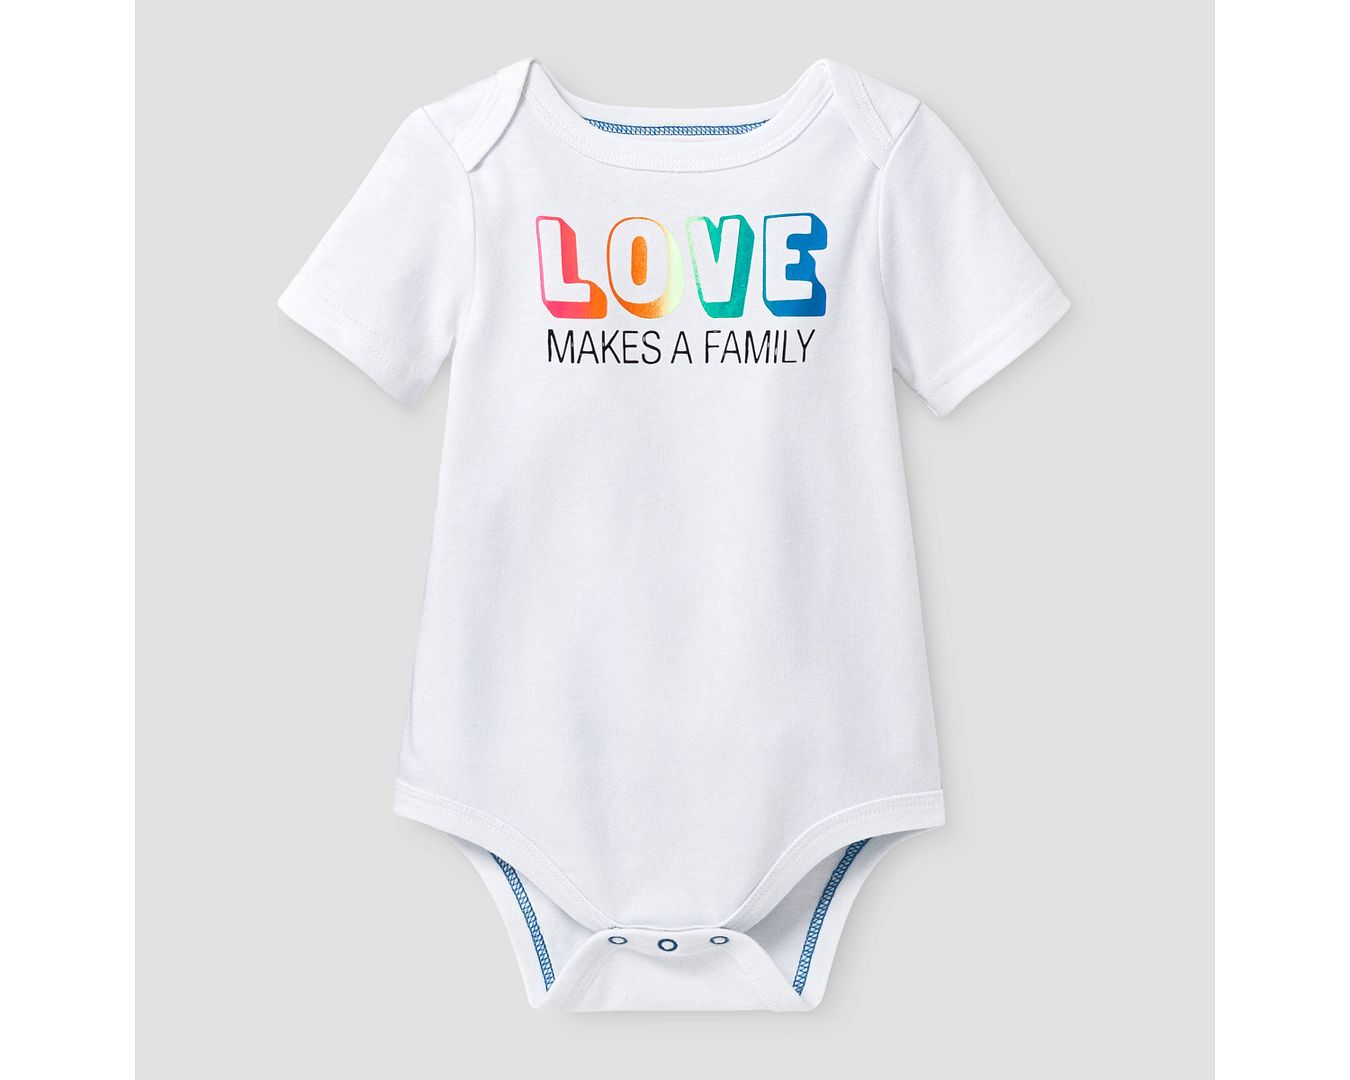 LOVE makes a family Pride tee at Target